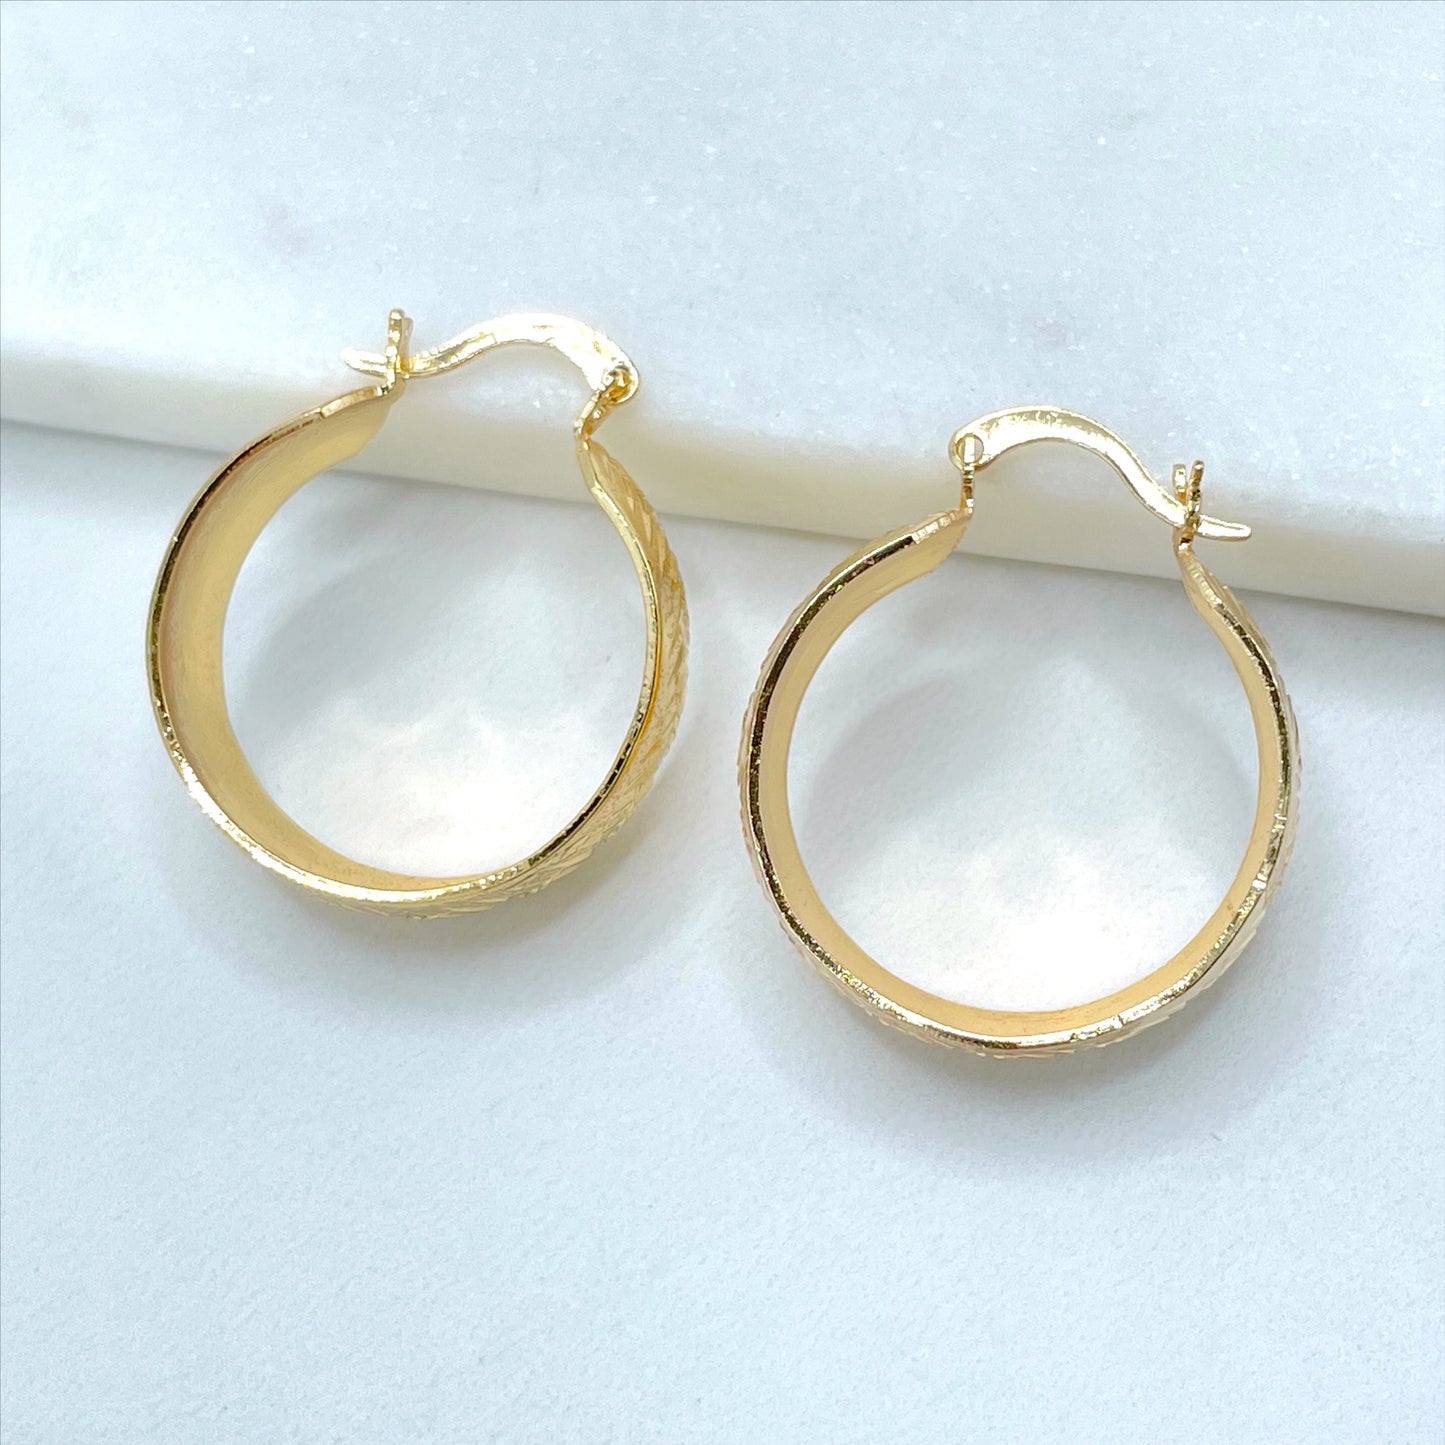 18k Gold Filled 9mm Thickness 25mm Textured Hoop Earrings Wholesale Jewelry Making Supplies